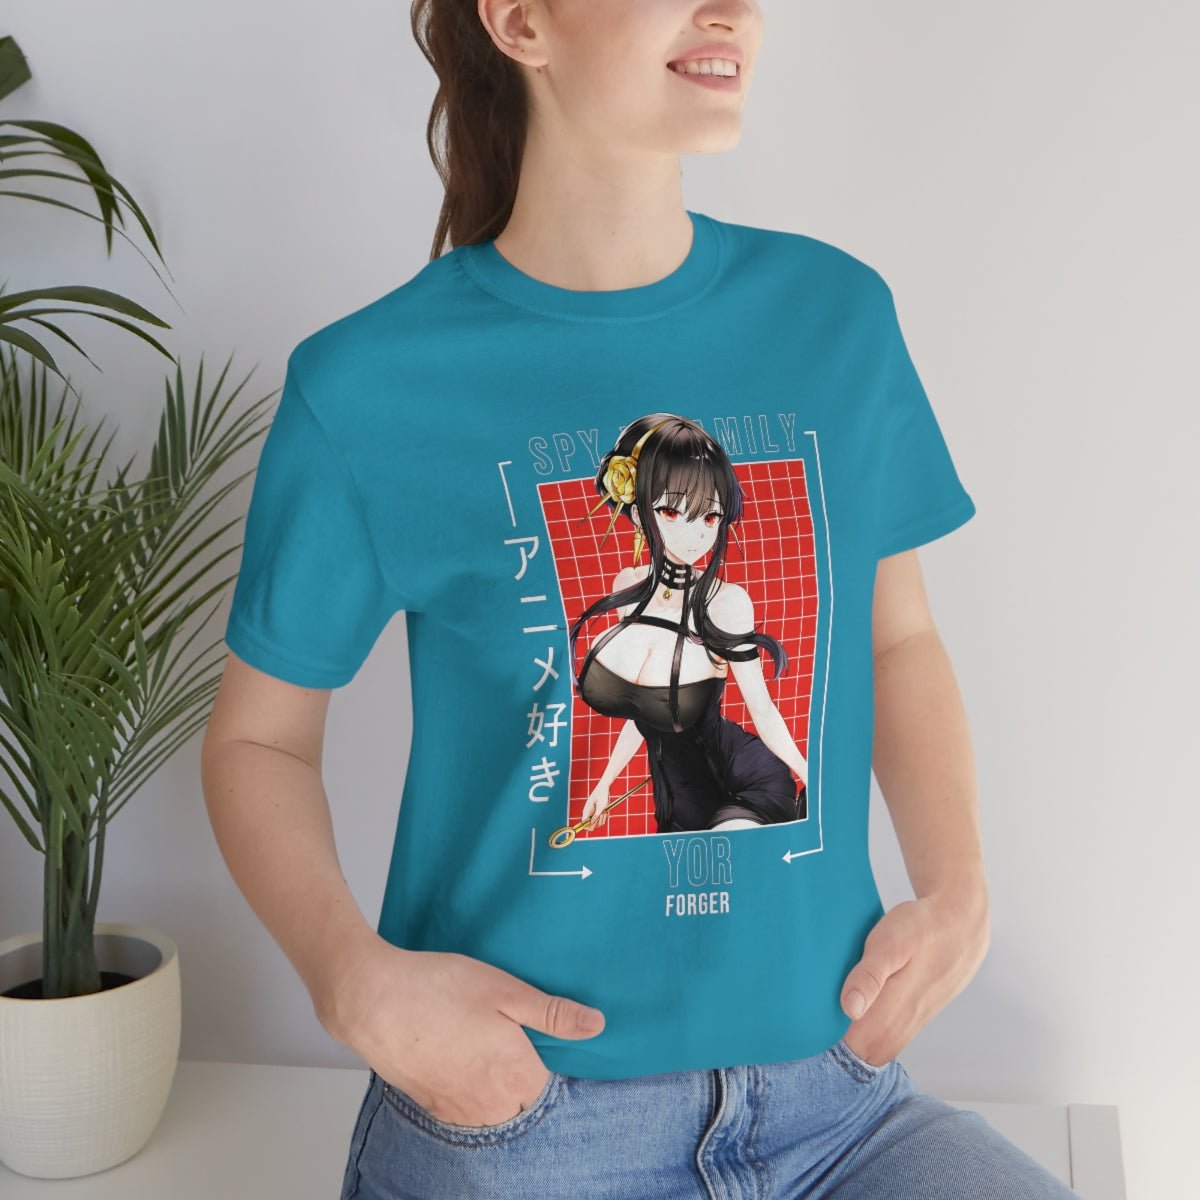 Yor Forger Spy x Family Anime Shirt - One Punch Fits